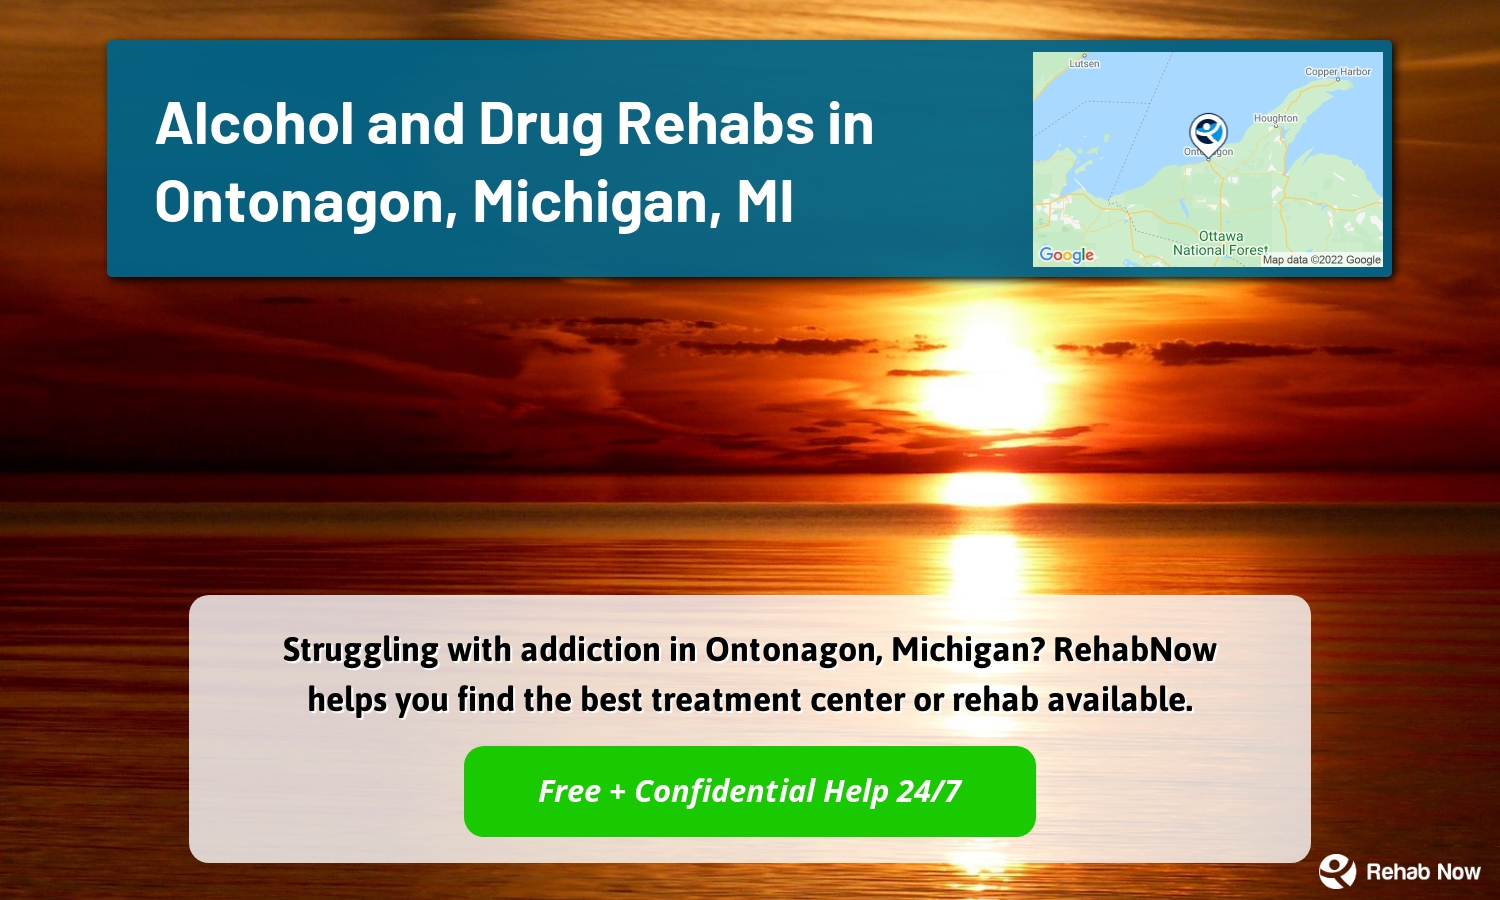 Struggling with addiction in Ontonagon, Michigan? RehabNow helps you find the best treatment center or rehab available.